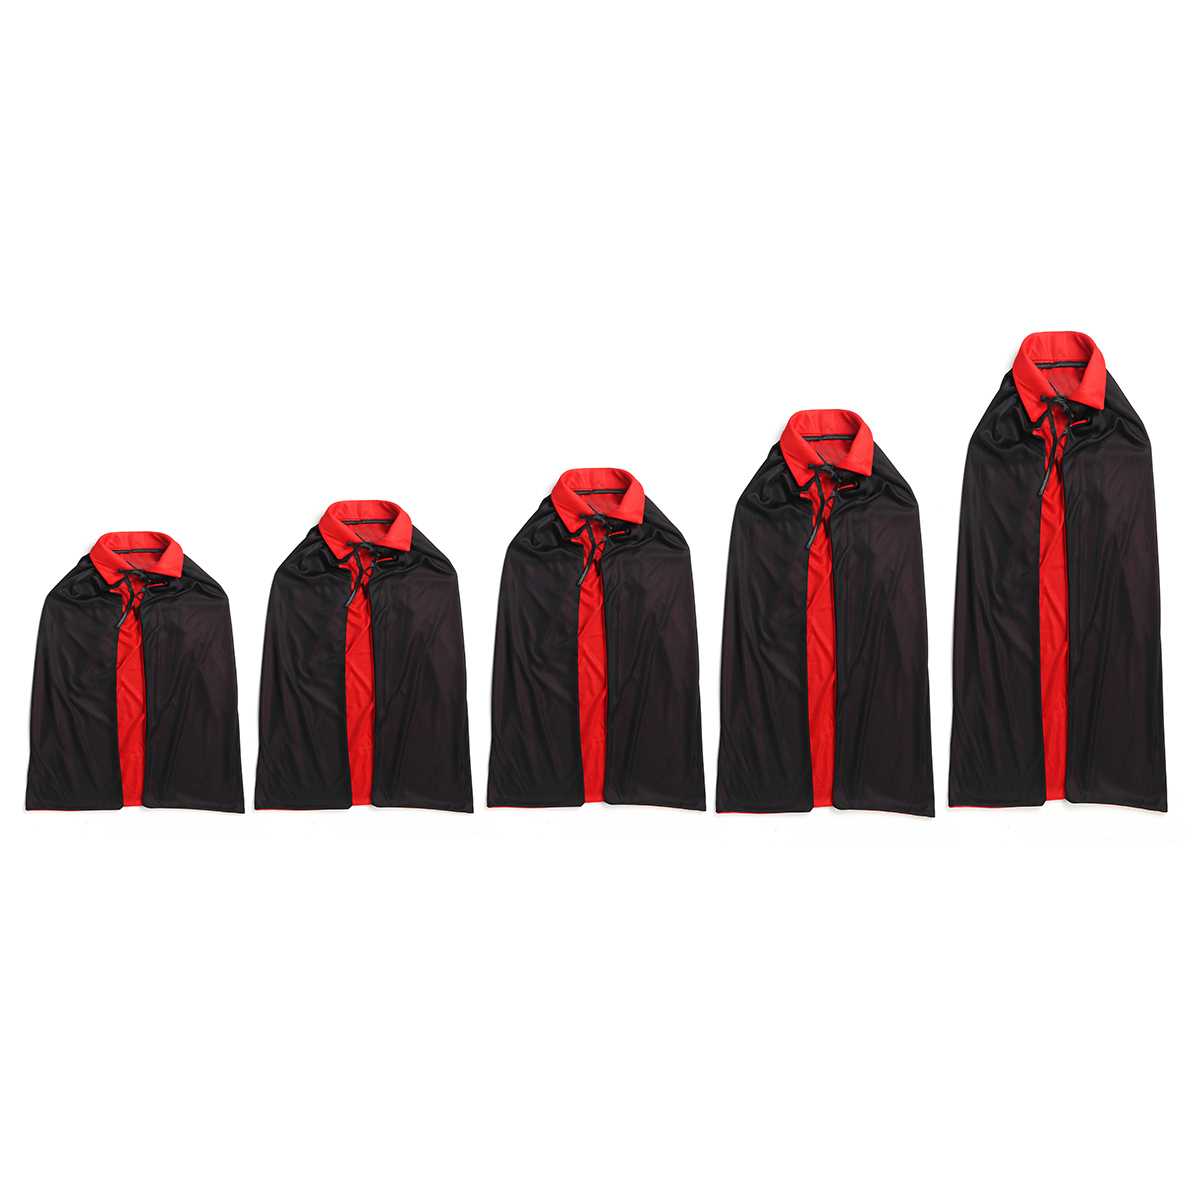 Halloween-Cape-Red-And-Black-Double-sided-Hooded-Childrens-Adult-Party-Dress-Up-Cape-1747148-3